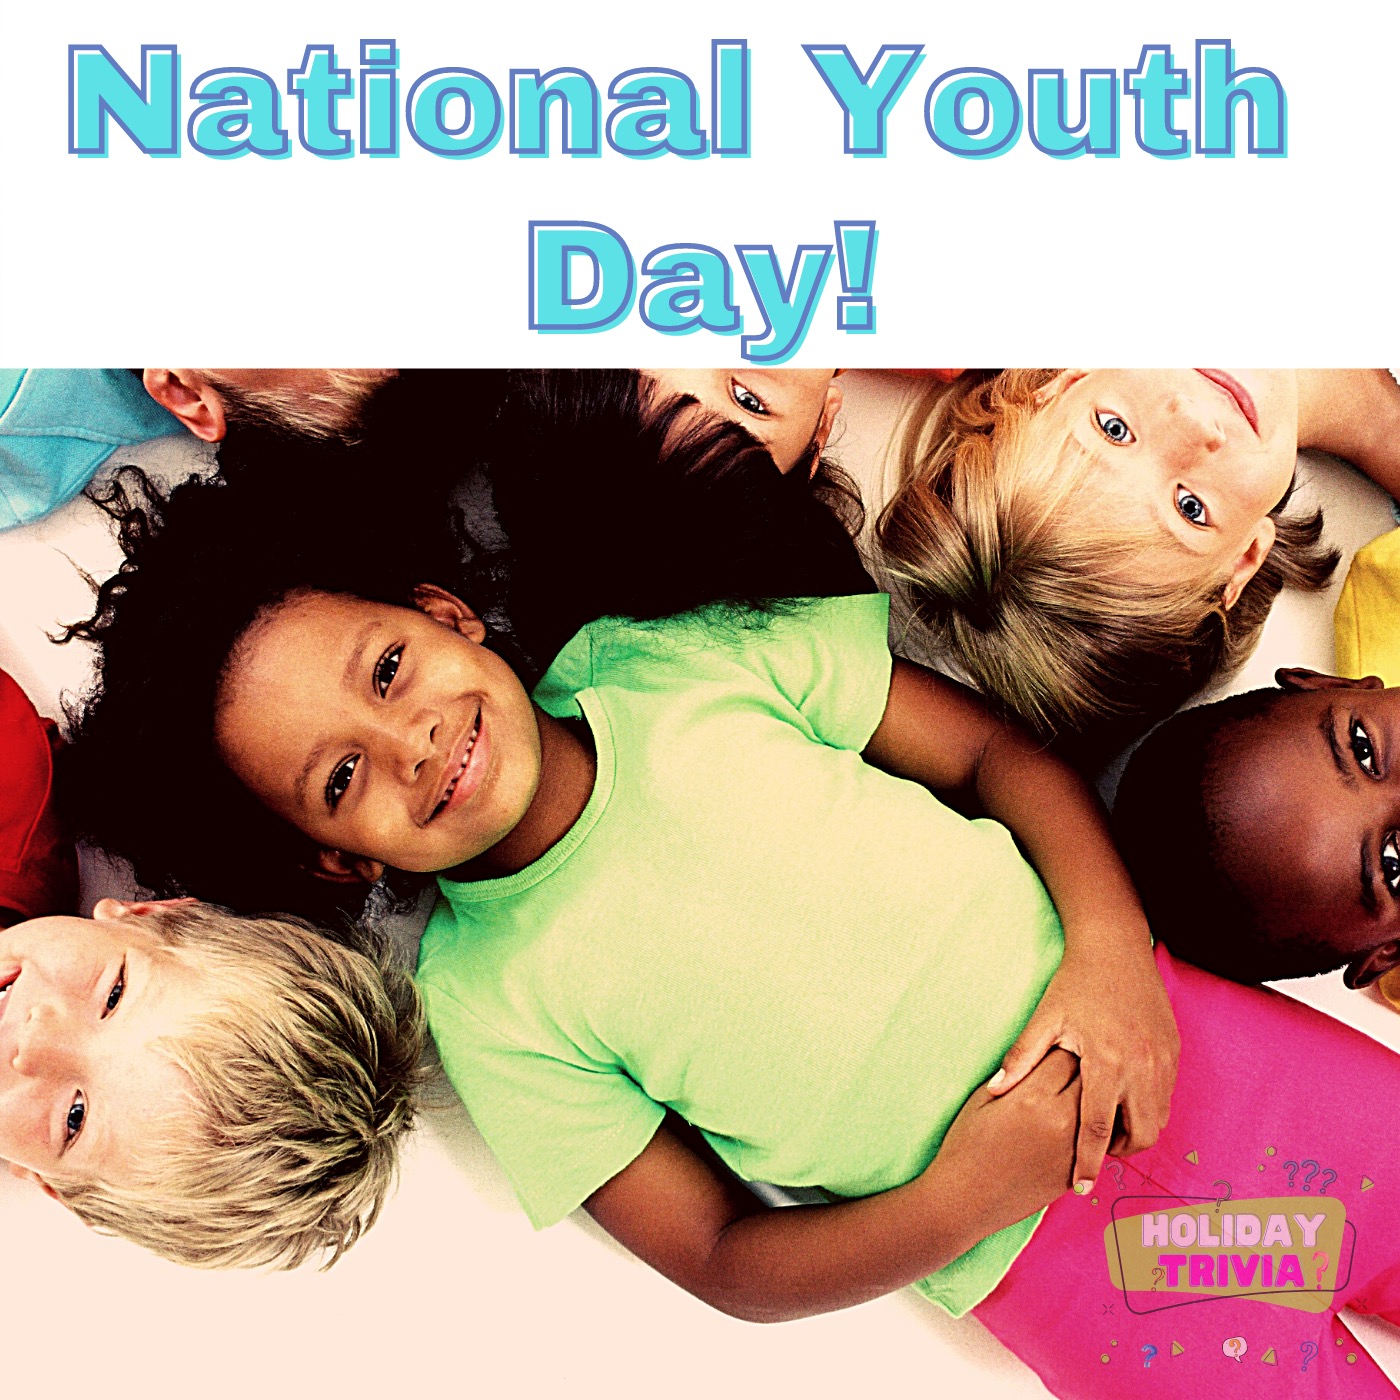 National Youth Day (Holiday Trivia Update) Image